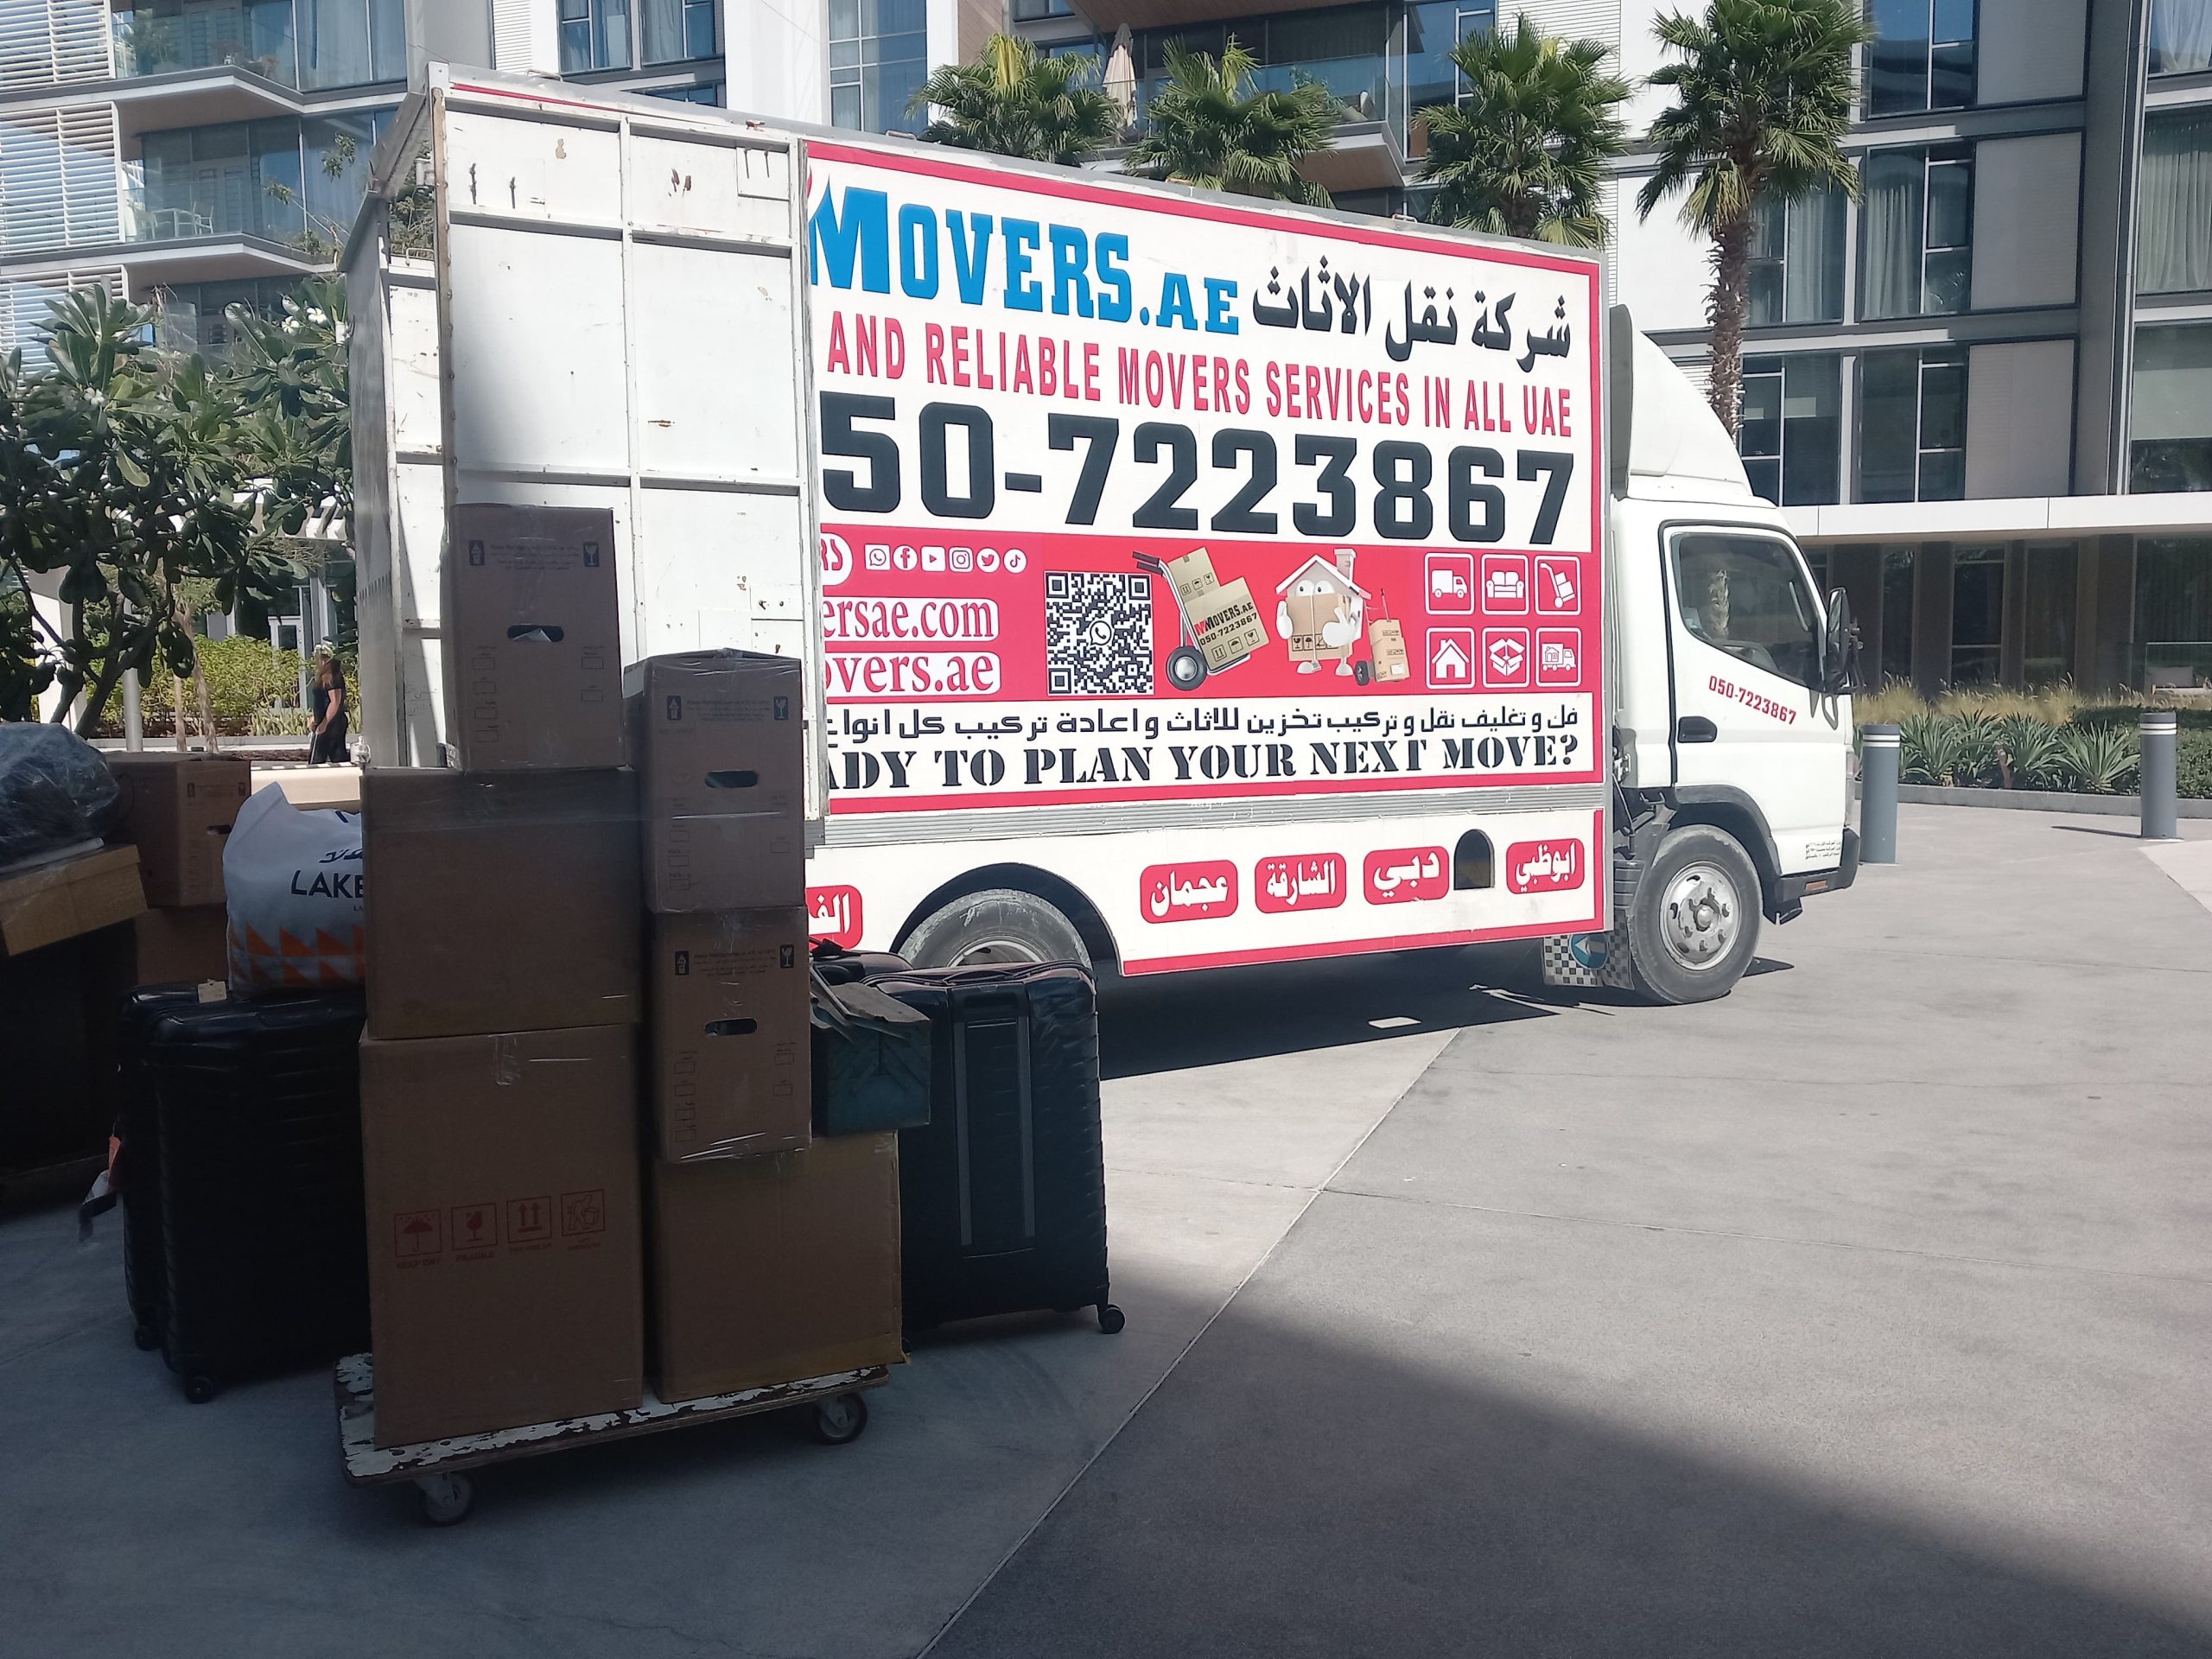 MOVERS AND PACKERS IN FUJAIRAH